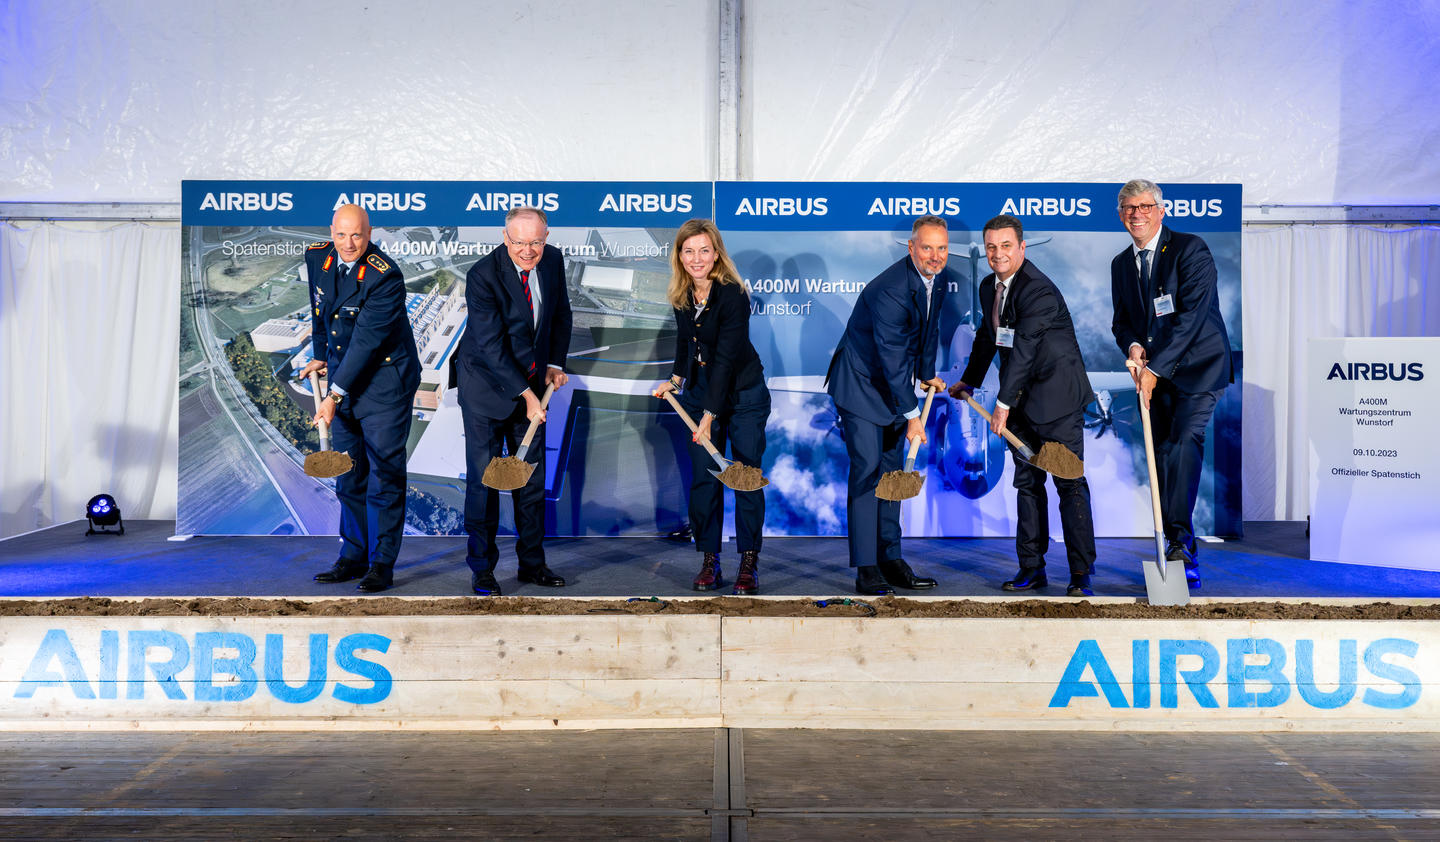 Groundbreaking ceremony for the new Airbus A400M Support Centre Wunstorf (from left):  Lieutenant General Ingo Gerhartz, Chief of the German Air Force; Stephan Weil, Minister President of Lower Saxony; Siemtje Möller, Parliamentary State Secretary to the Federal Minister of Defence; Michael Schöllhorn, CEO Airbus Defence and Space; Ralph Herzog, Vice President of the Federal Office of Bundeswehr Equipment, Information Technology and In-Service Support (BAAINBw); and Carsten Piellusch, Mayor of Wunstorf.